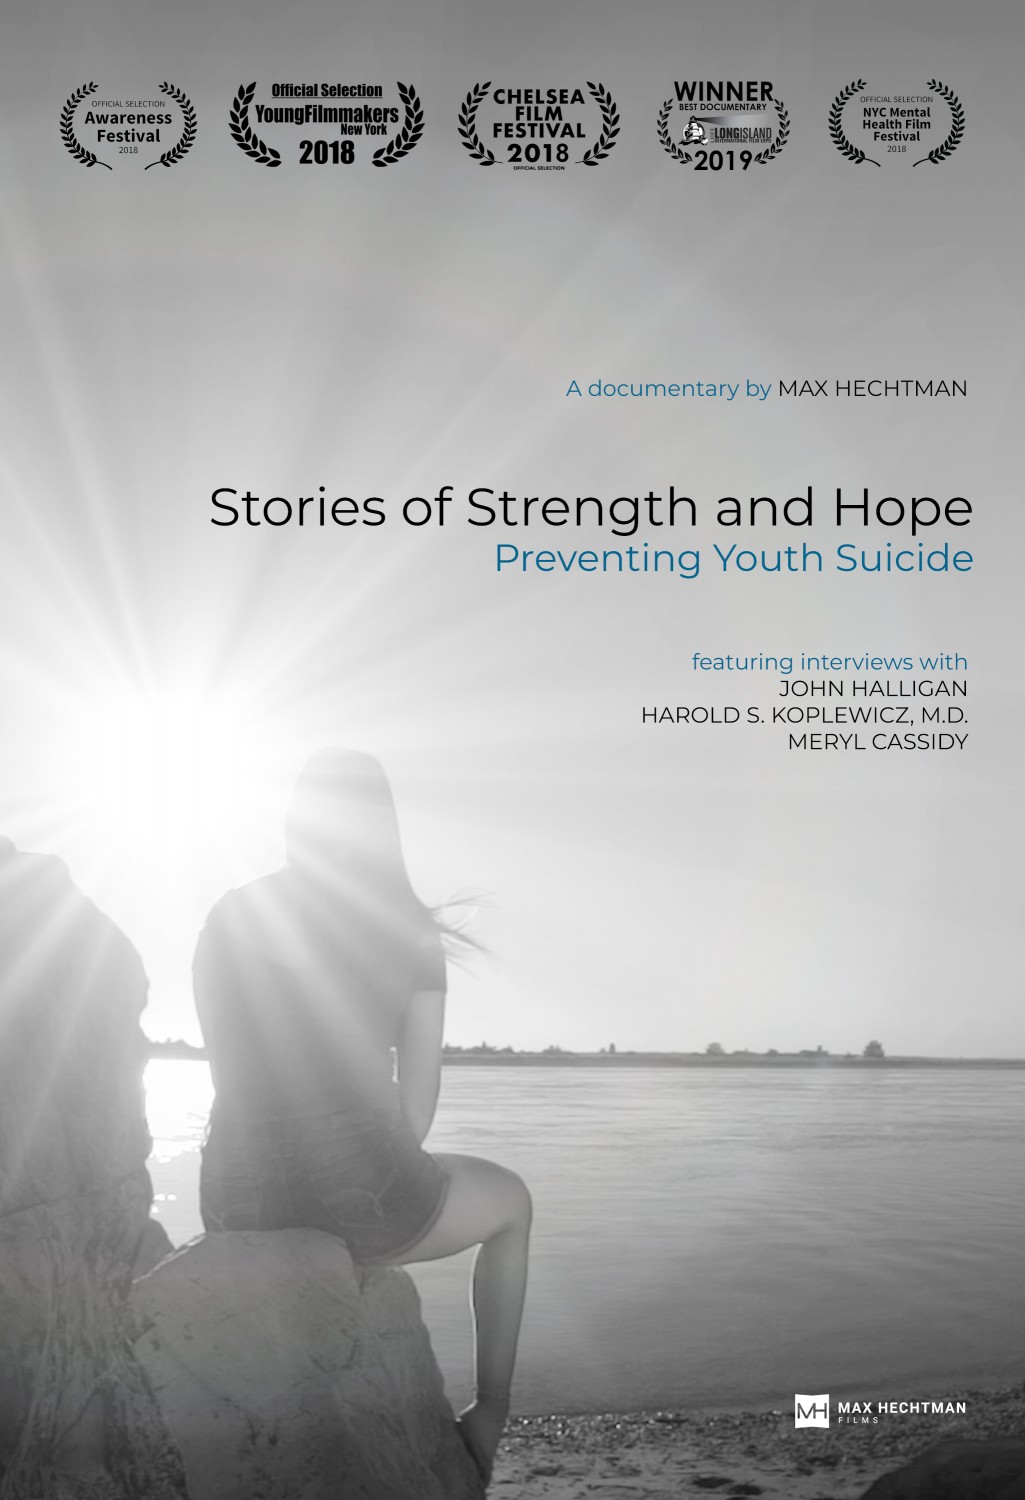 Extra Large Movie Poster Image for Stories of Strength and Hope: Preventing Youth Suicide